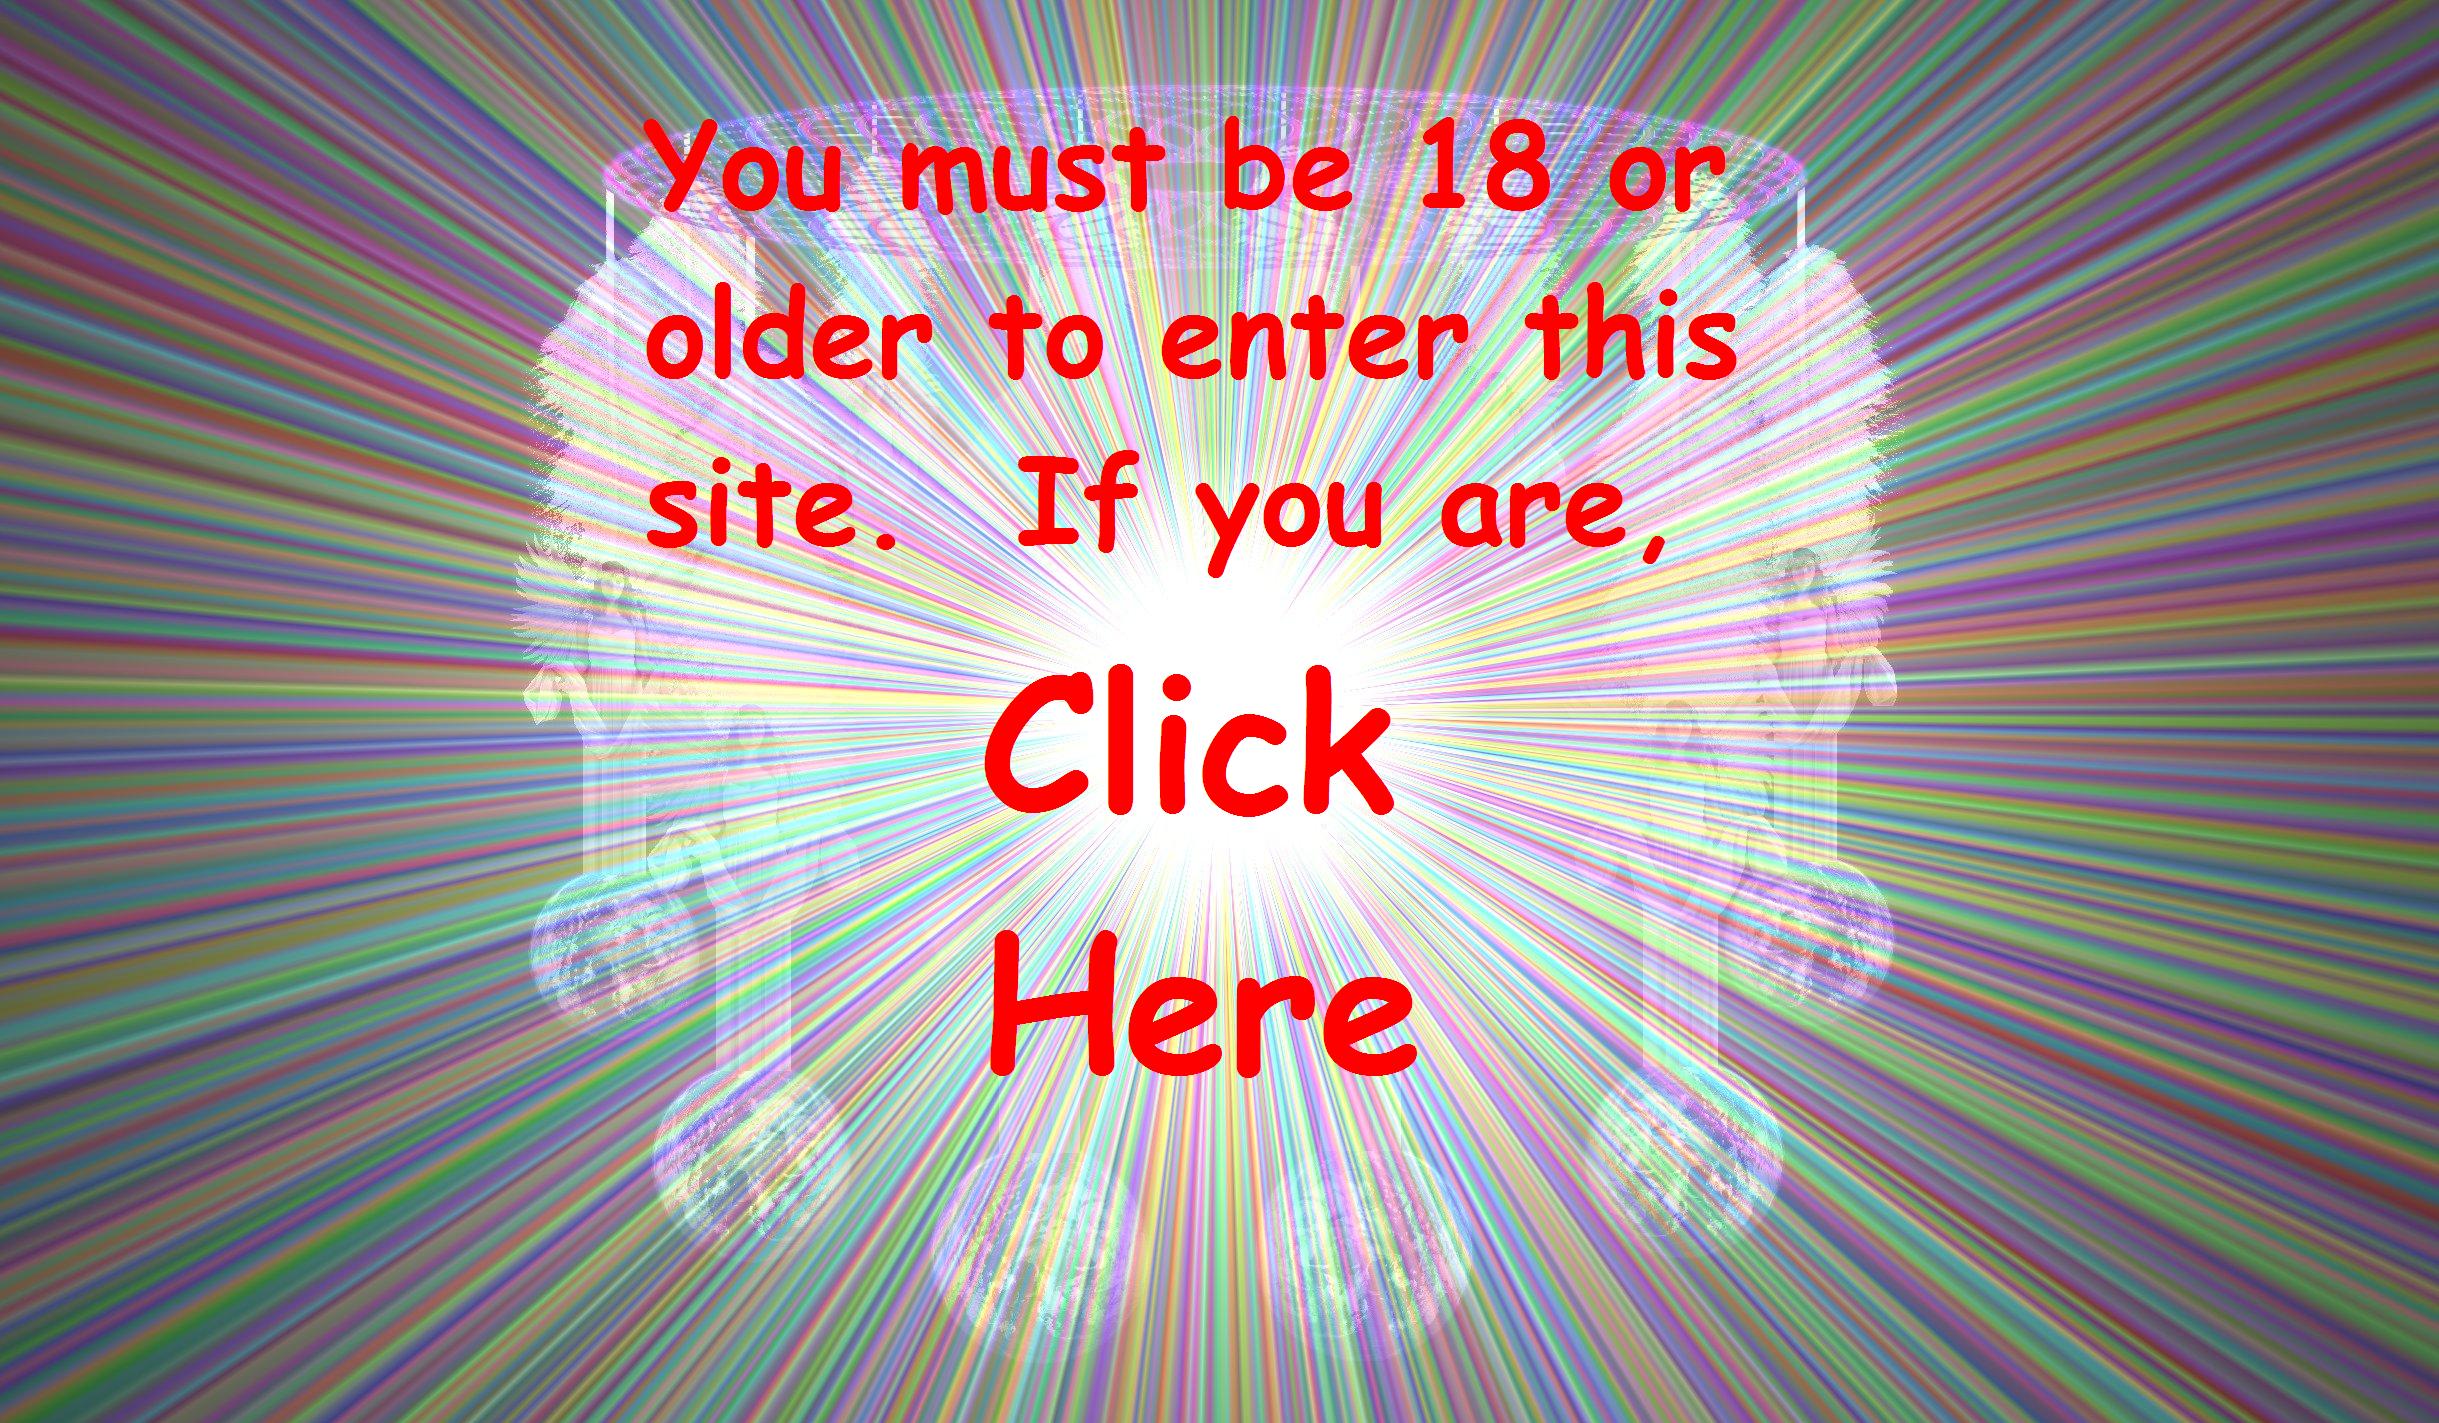 You must be 18 or oder to enter this site.  If you are, Click Here.